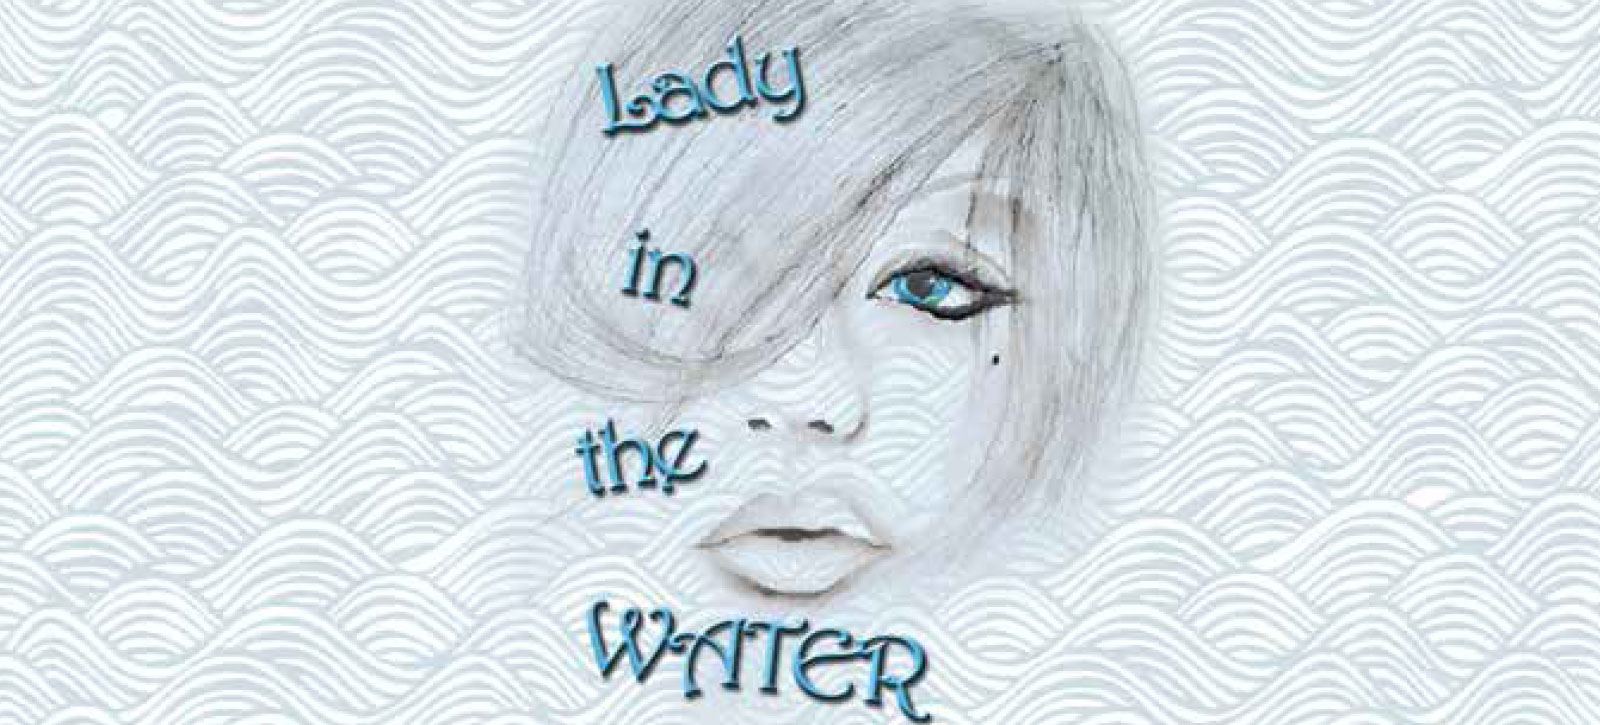 lady-in-the-water